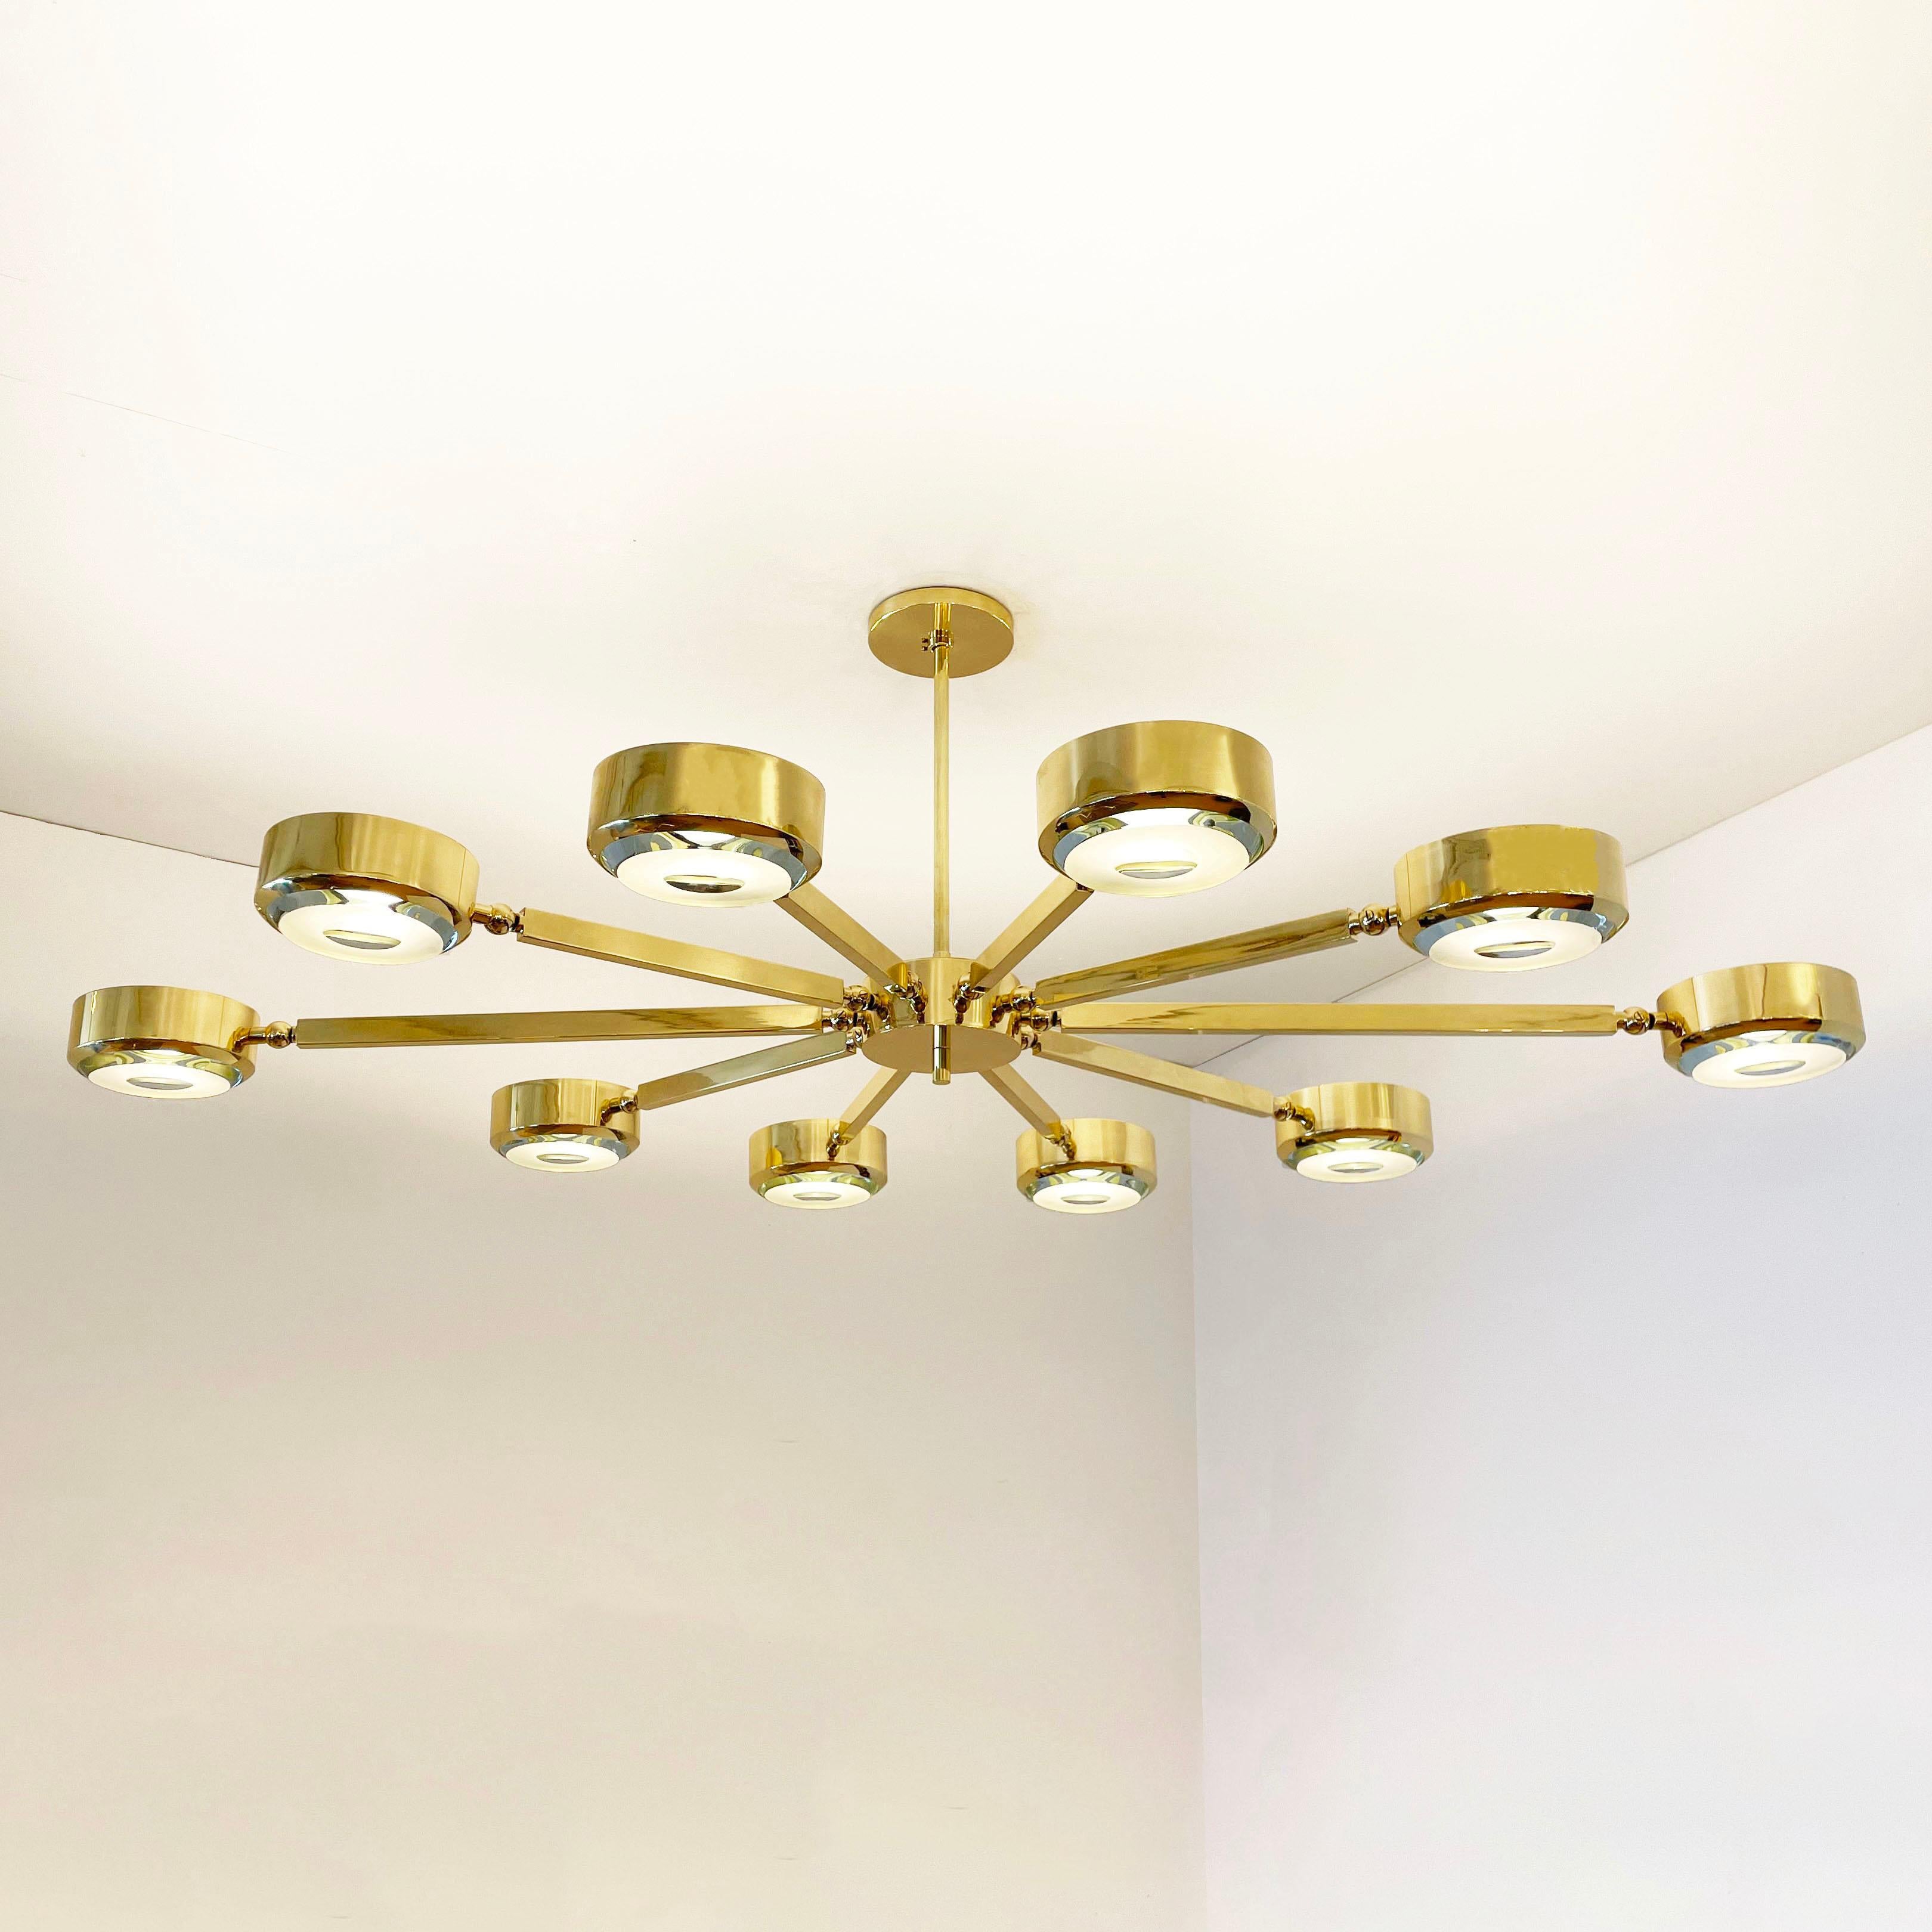 Brass Oculus Oval Ceiling Light by Gaspare Asaro- Bronze Finish with Carved Glass For Sale